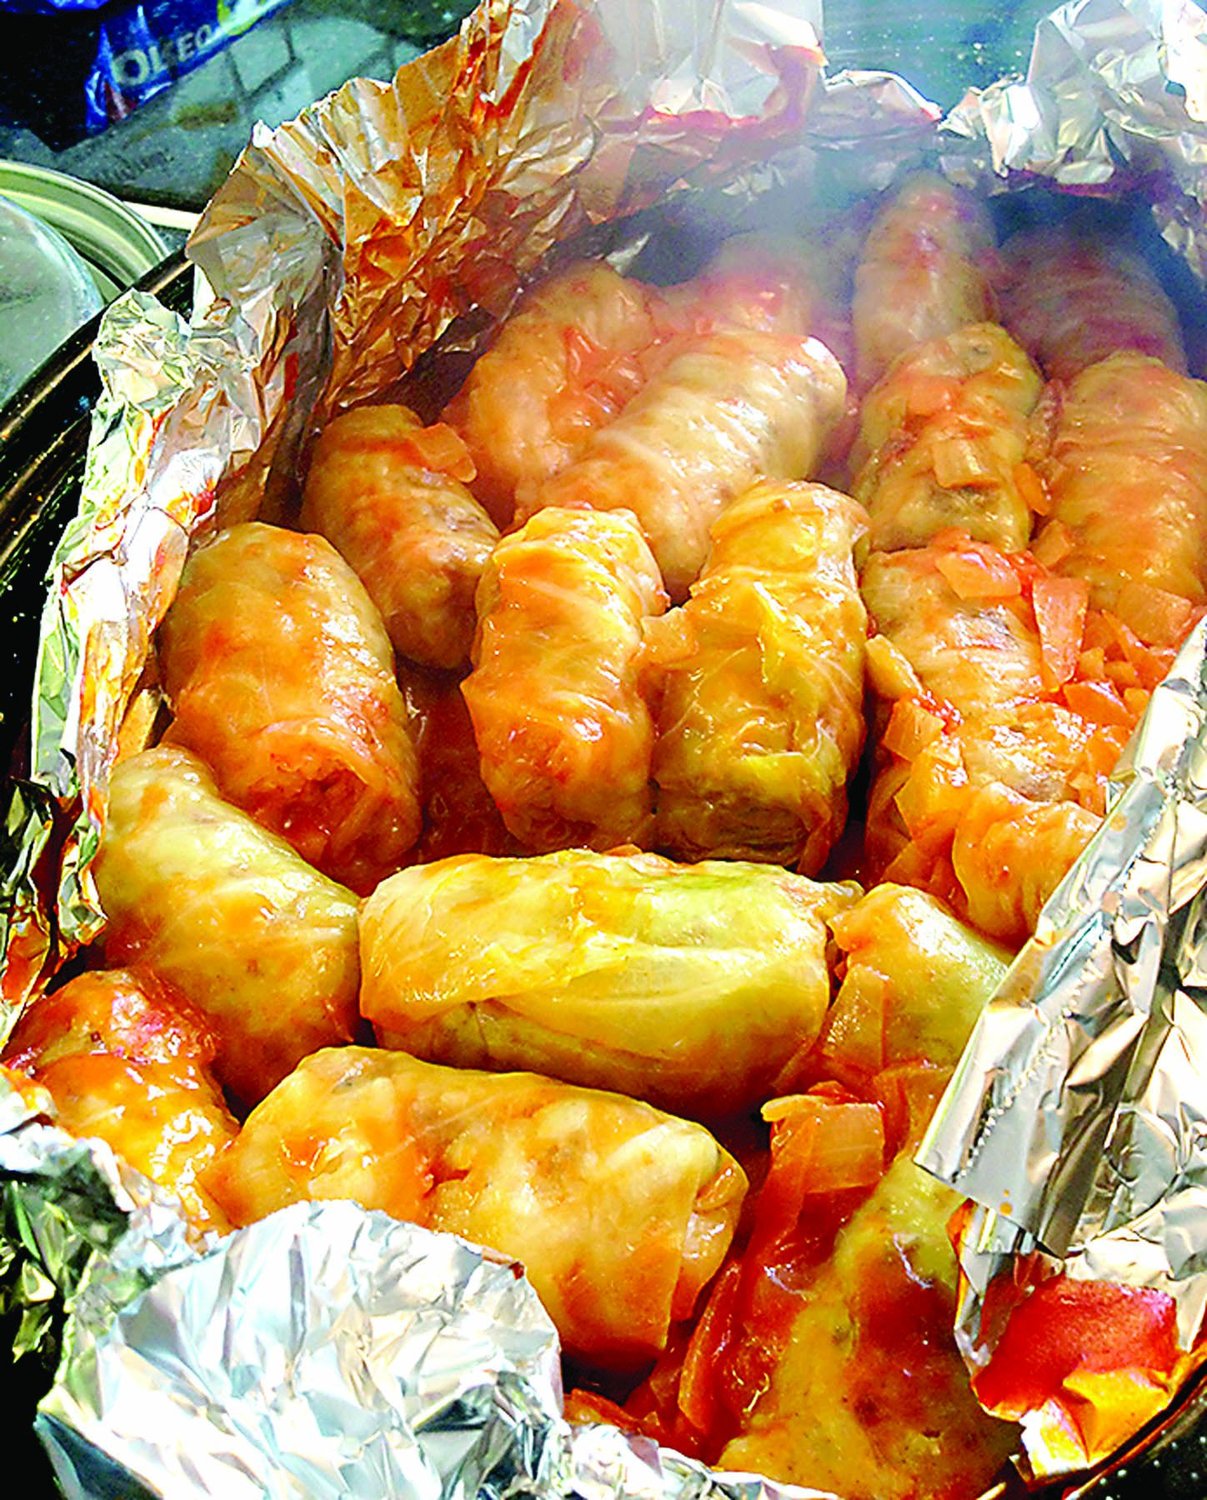 Cabbage rolls are a simple, hearty and flavorful dish to chase away the winter chills. Photography courtesy of claudiascookbook.com.